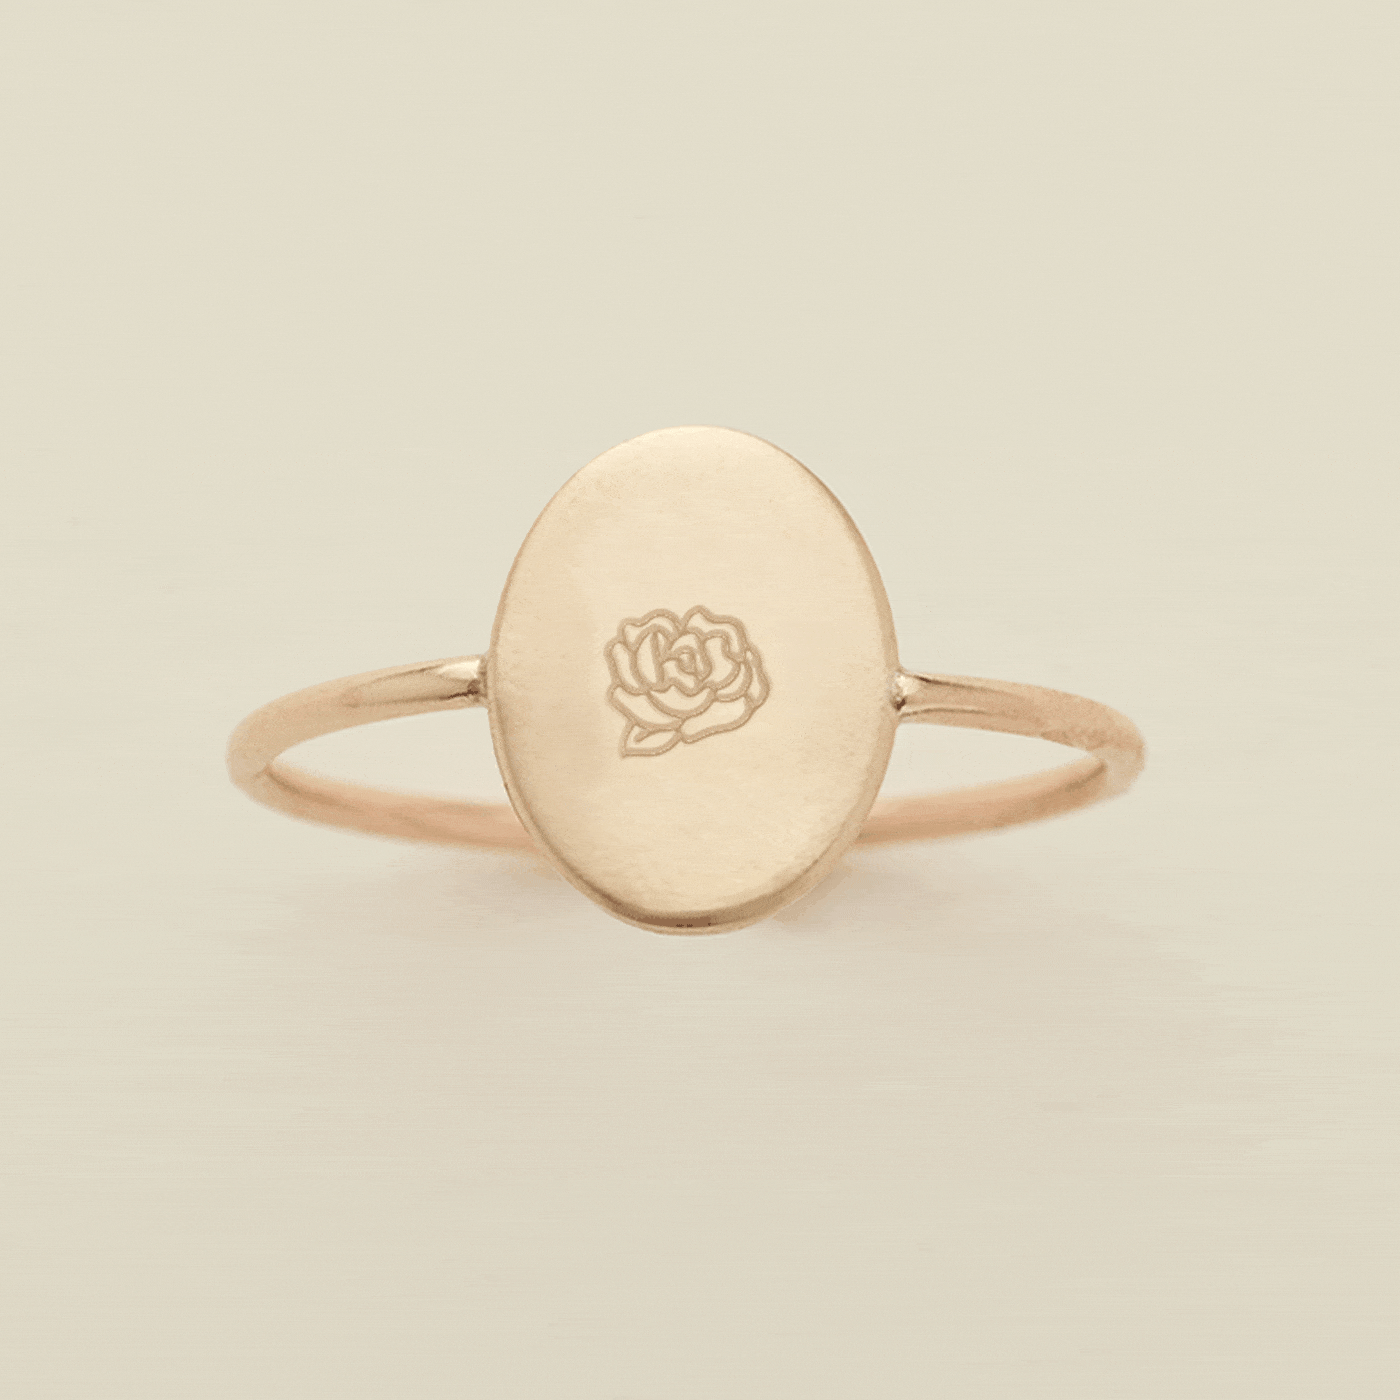 Oval Customized Ring - Initial or Birth Flower Gold Filled / 5 Ring